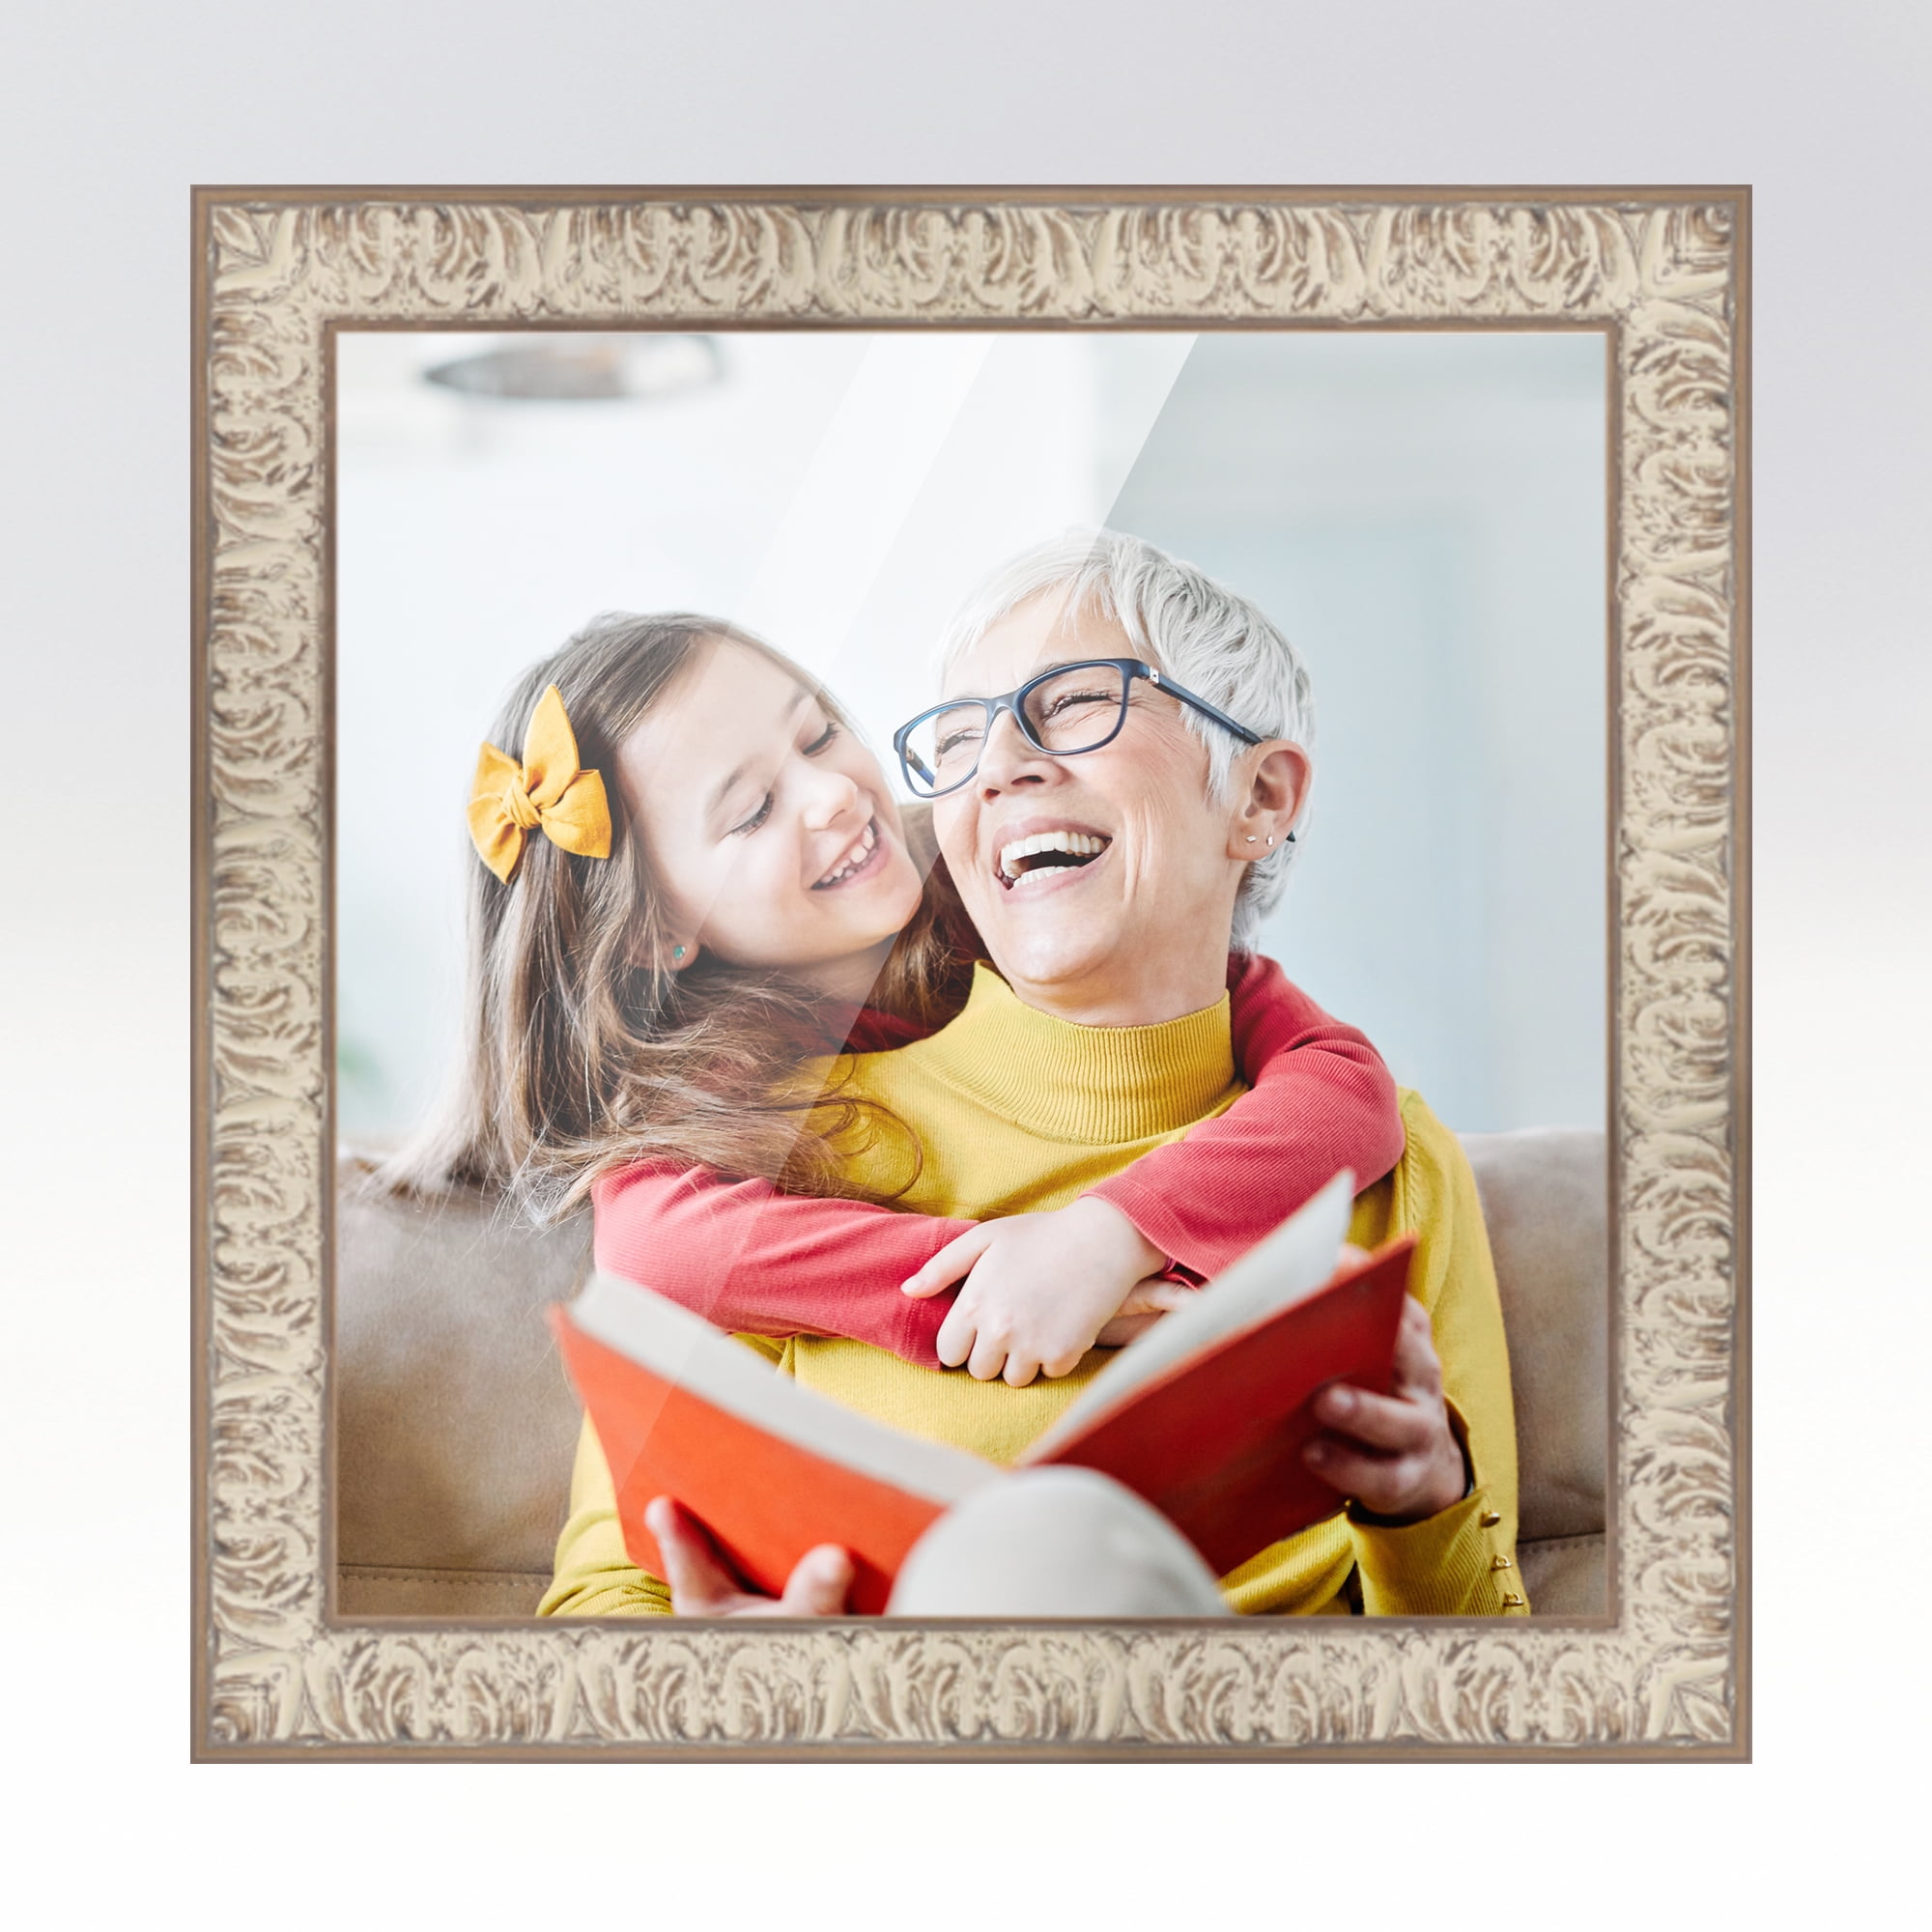 CustomPictureFrames White Wood Picture Frame - Made to Display Artwork Measuring 12x12 Inches